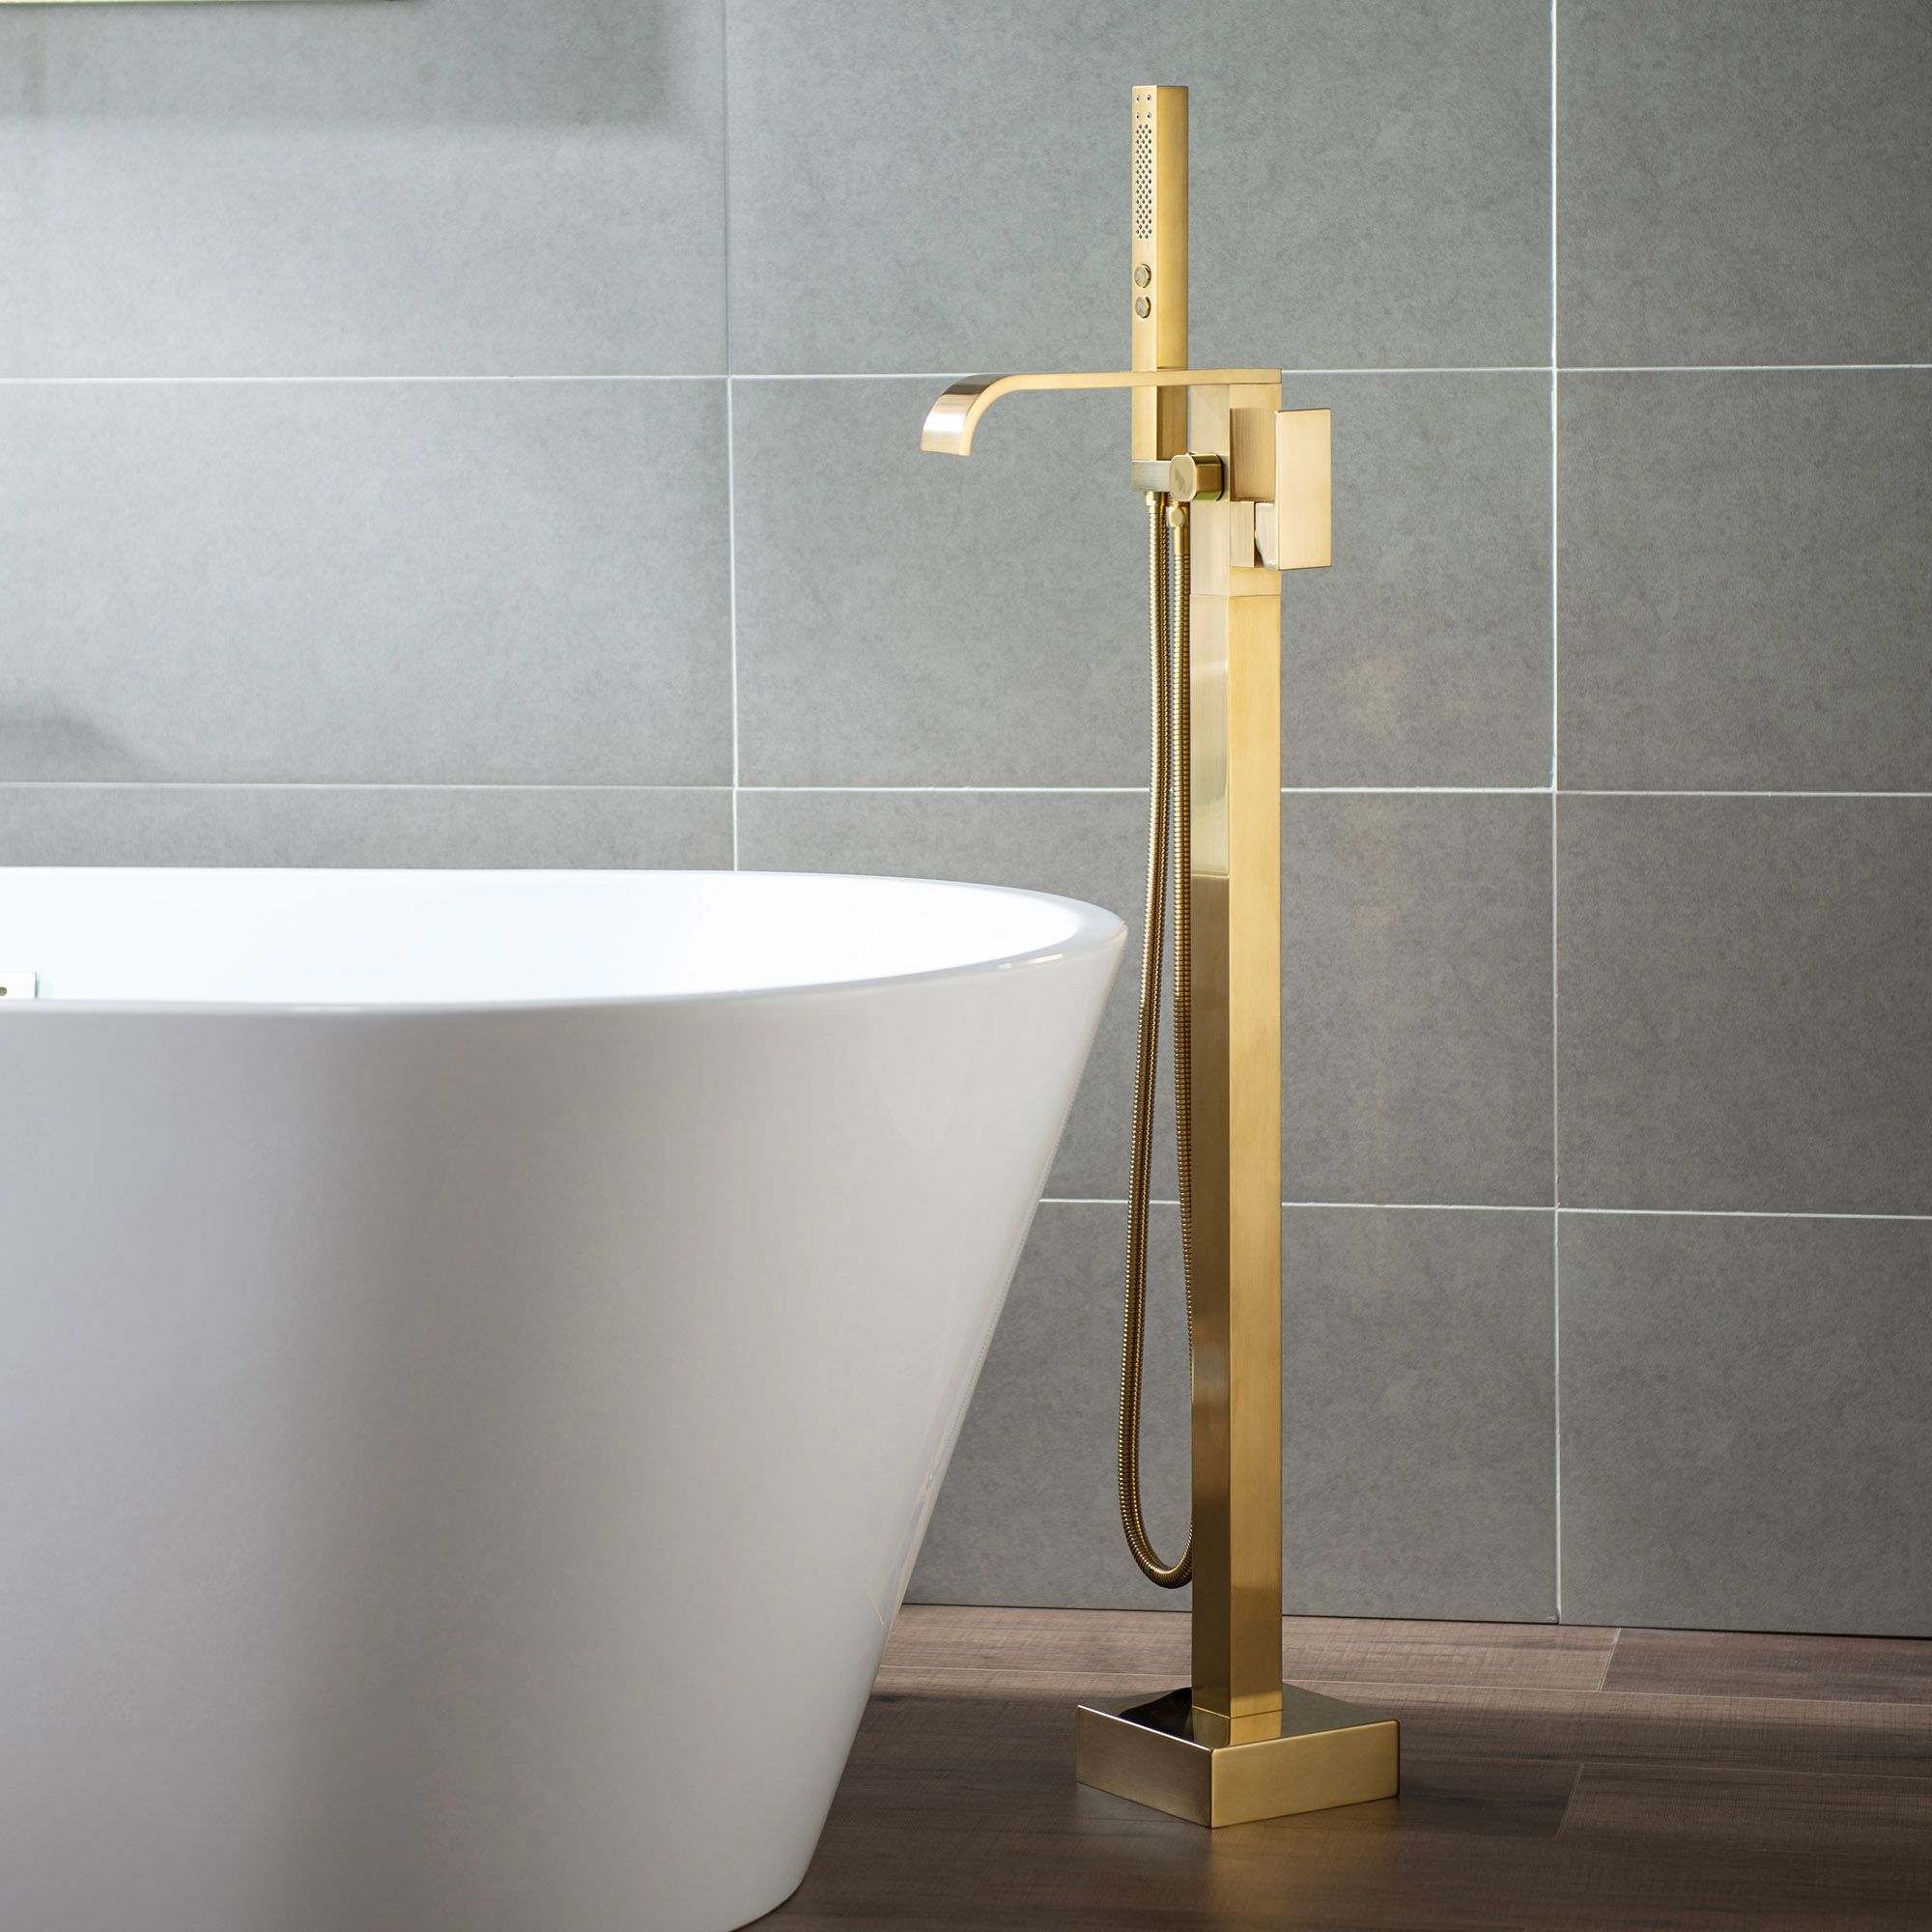  WOODBRIDGE F0039BG Contemporary Single Handle Floor Mount Freestanding Tub Filler Faucet with Hand shower in Brushed Gold Finish._12218